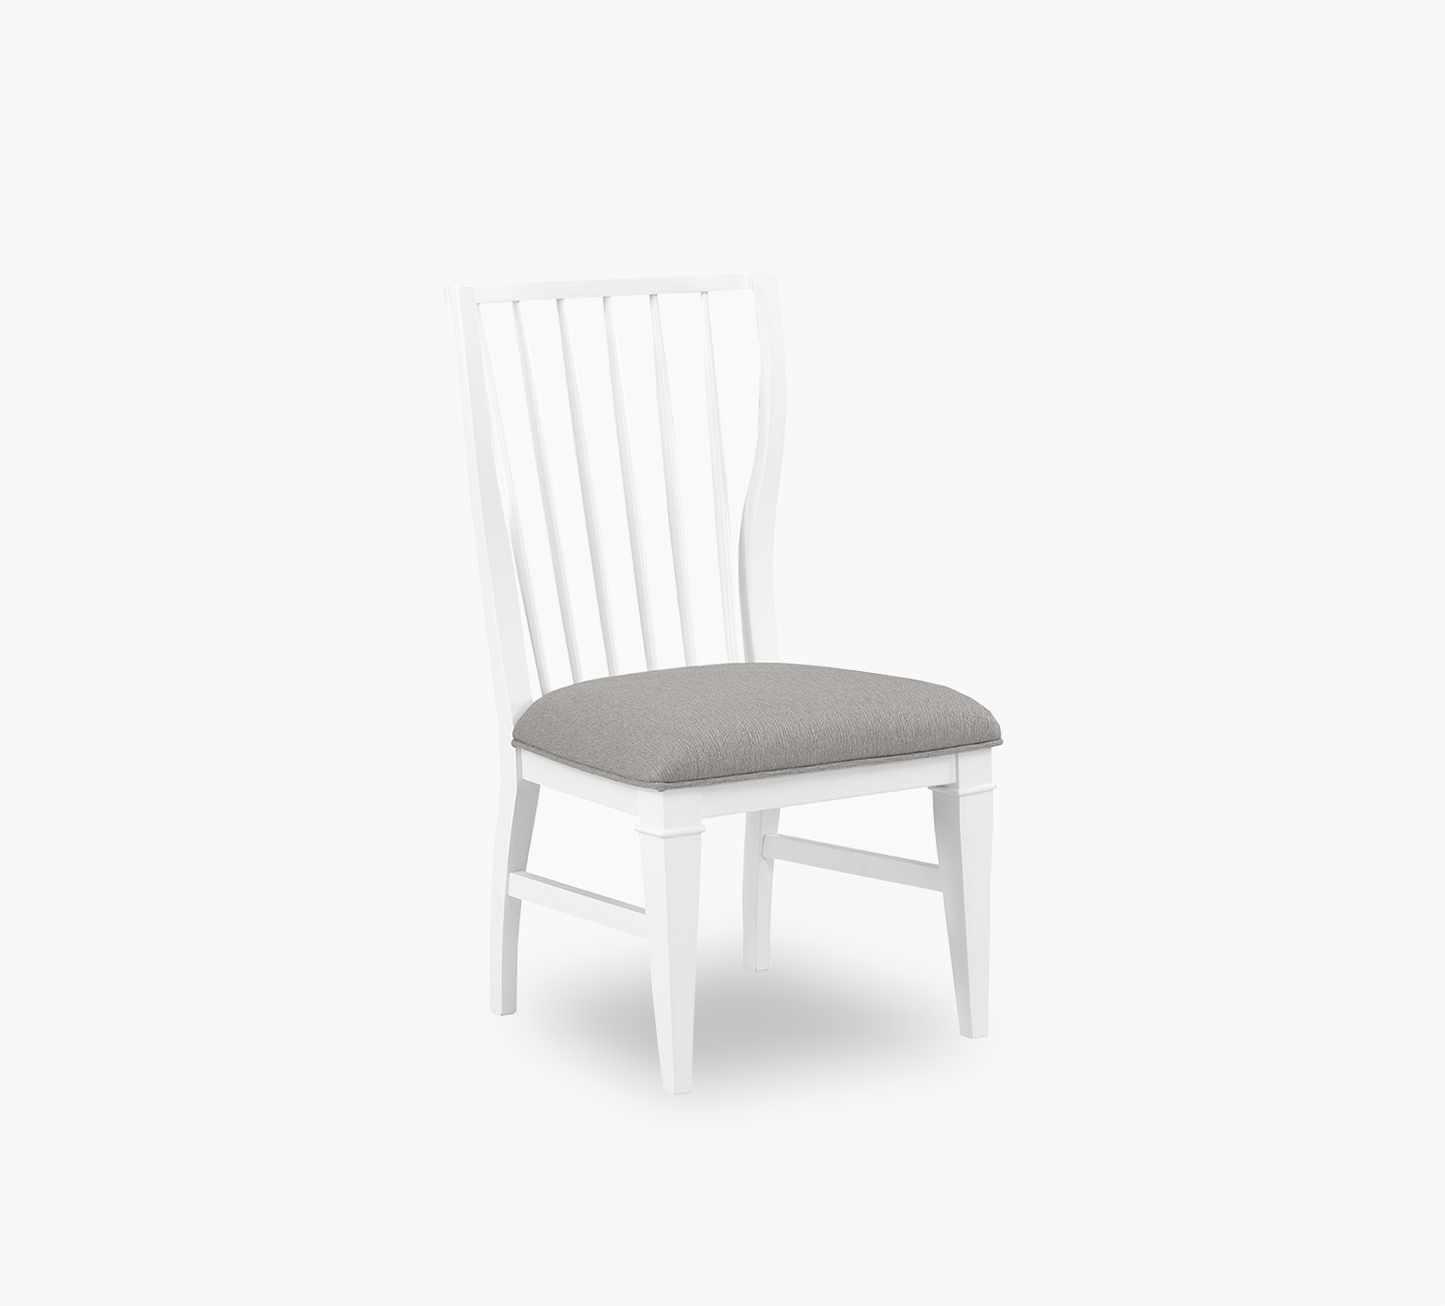 Subway Tile Side Chair White